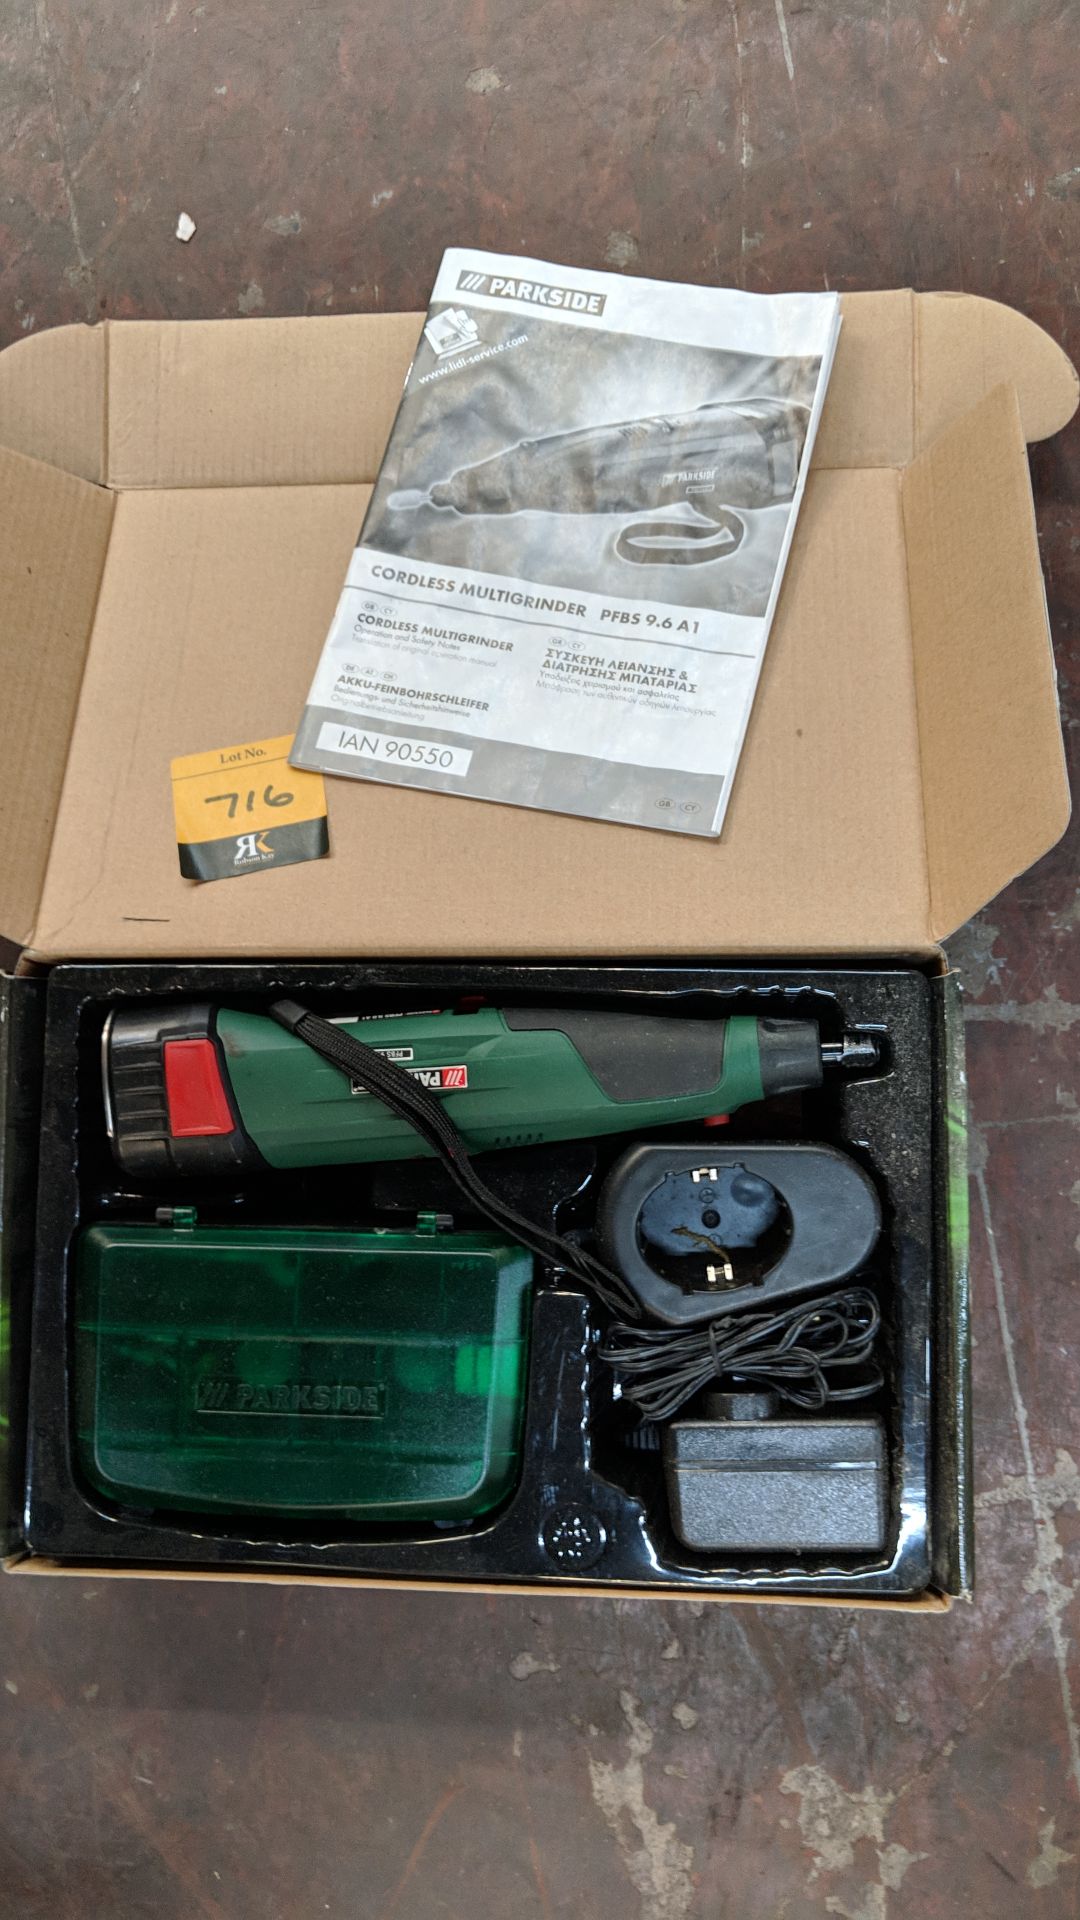 Parkside cordless multi grinder including battery, charger & case of heads IMPORTANT: Please